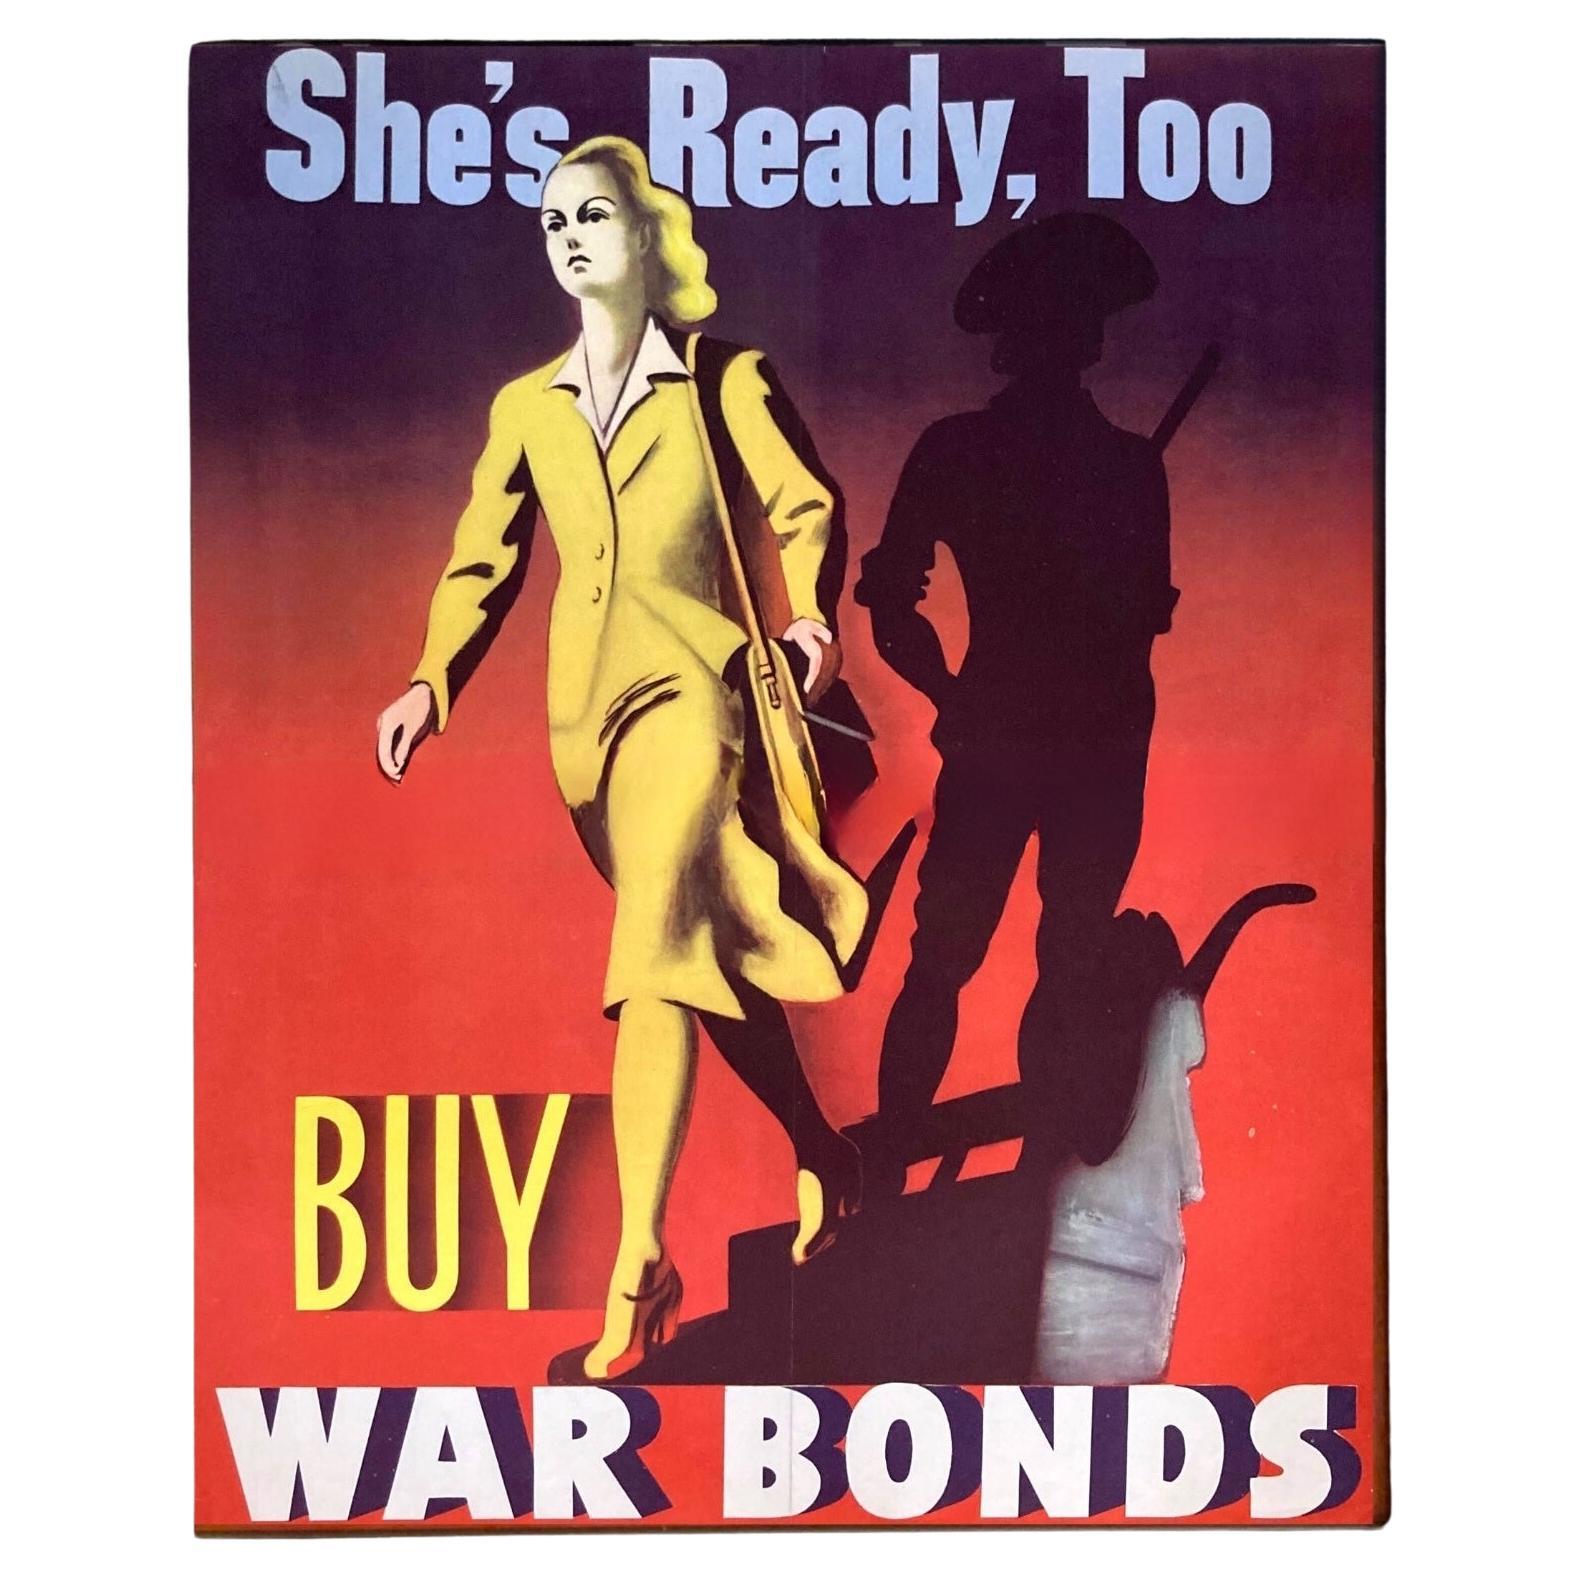 Presented is a vintage WWII War Bonds poster, printed in 1942. In the poster, a confident woman sets out with conviction to buy war bonds, her hand over her pocketbook. As the woman walks, she leaves behind the shadow of the Concord minutemen. The